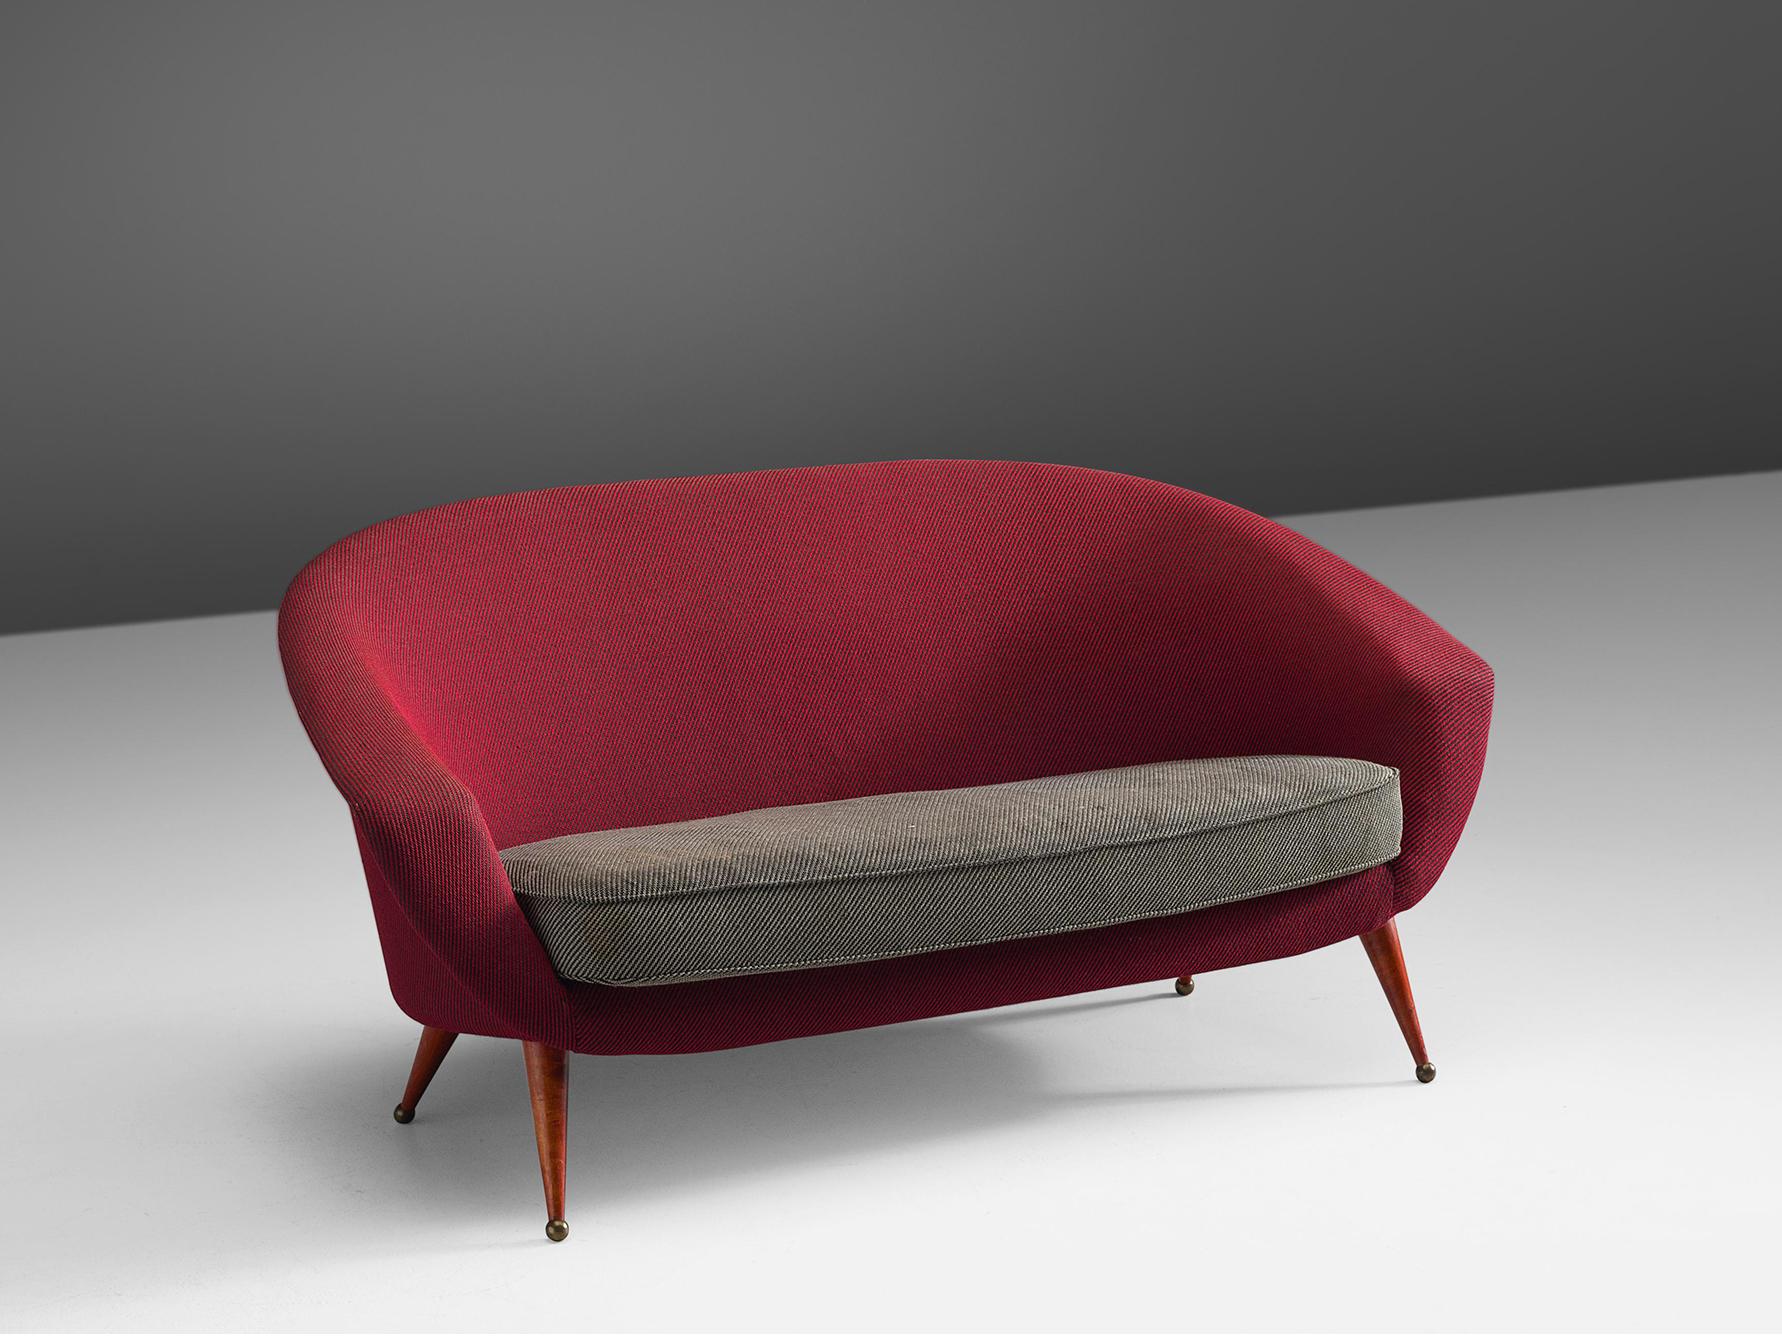 Brass Folke Jansson 'Tellus' Sofa in Red Grey Upholstery For Sale